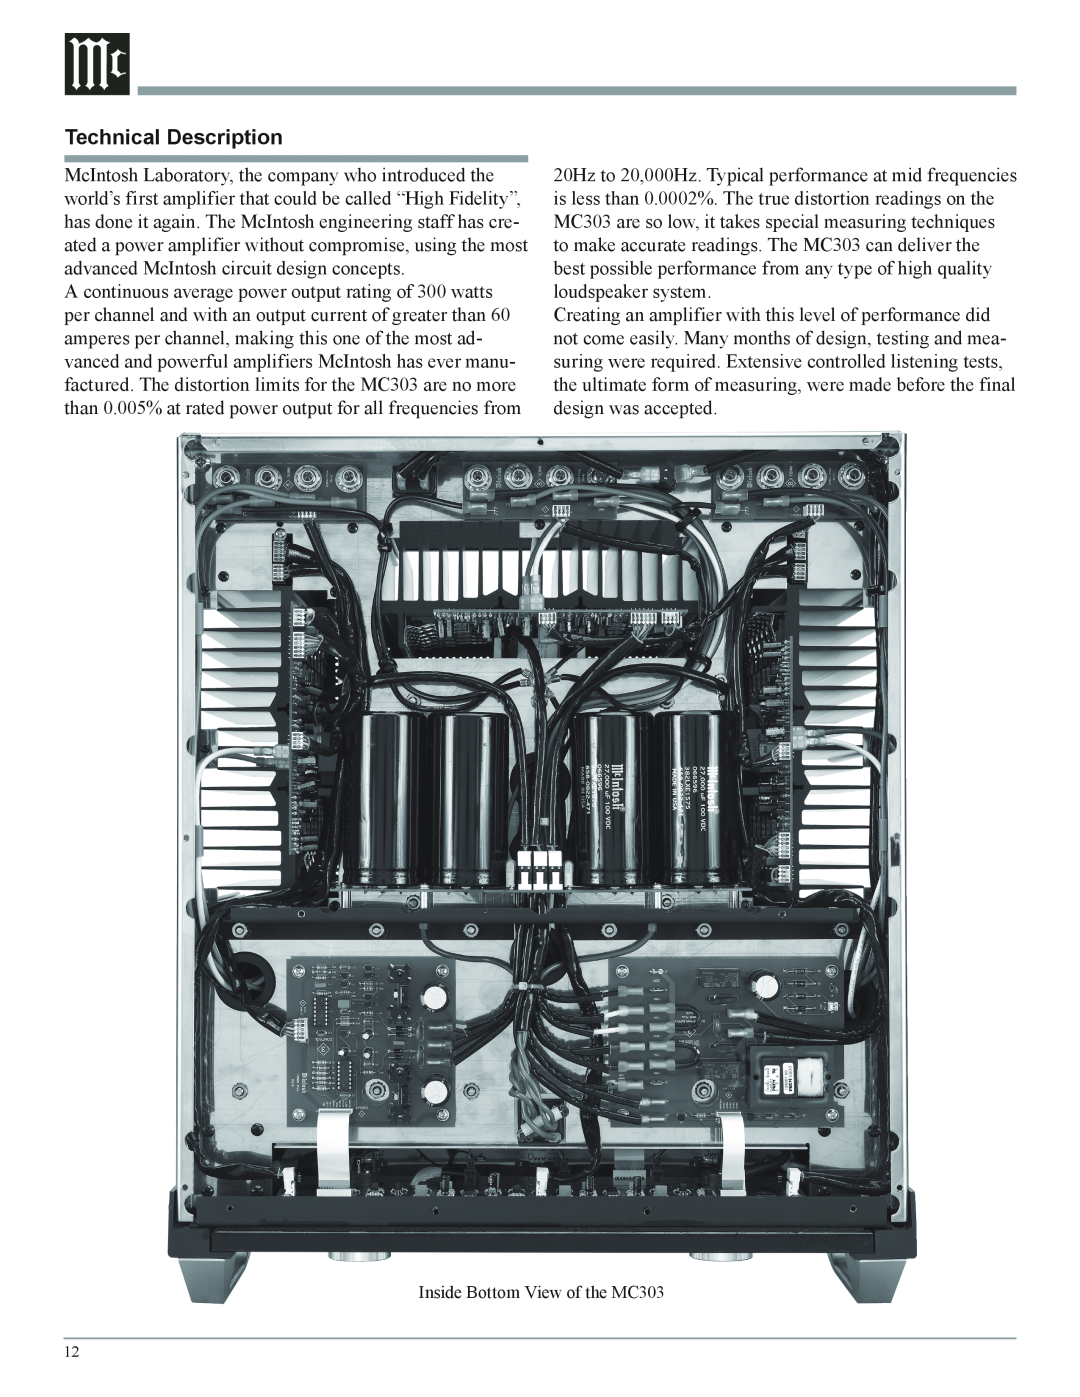 McIntosh owner manual Technical Description, Inside Bottom View of the MC303 